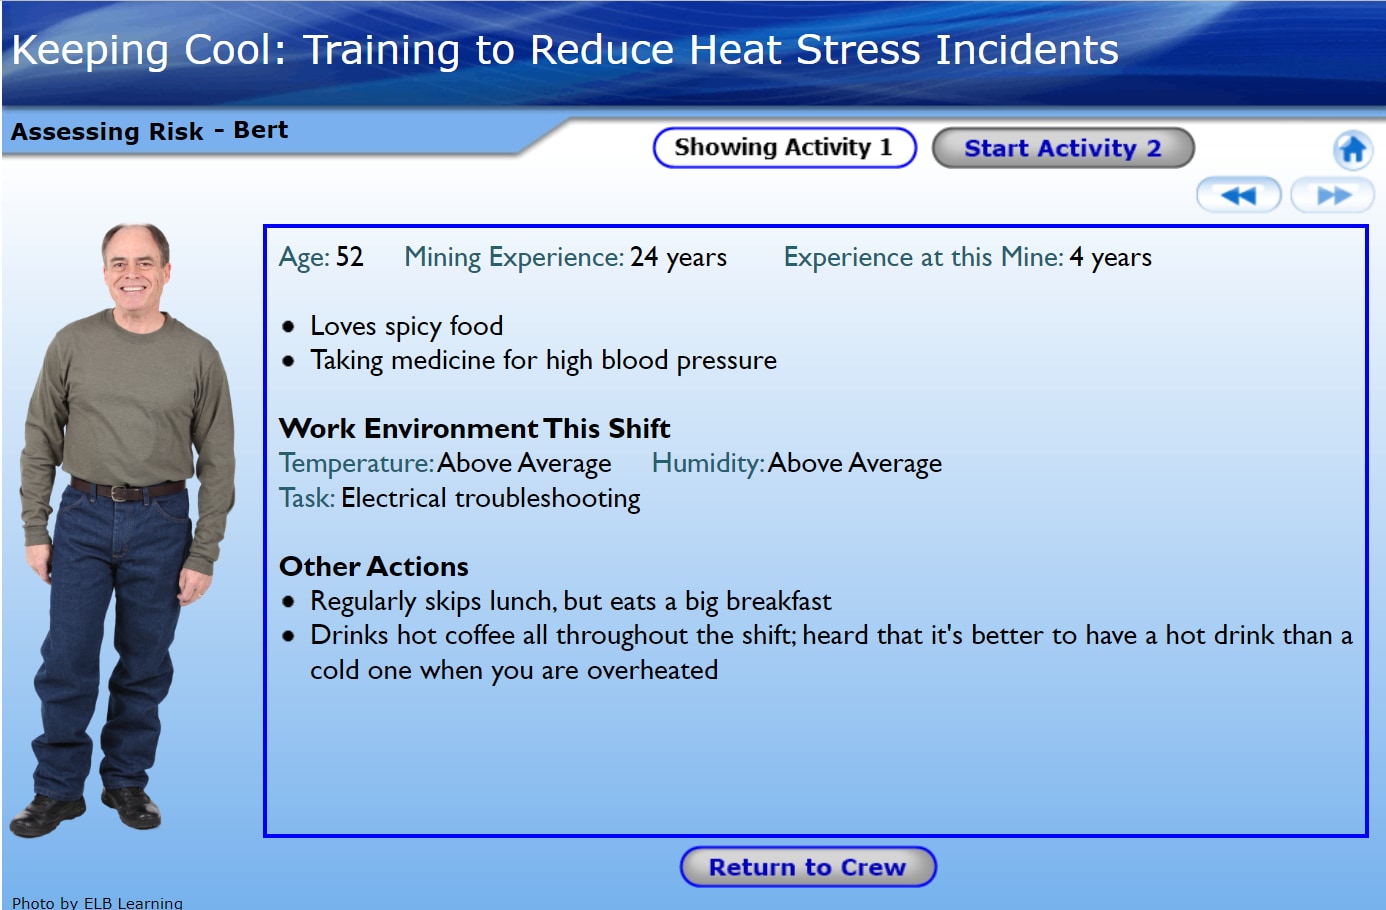 Screen from Activity 1 showing a worker named Bert and details relevant to his heat stress risk, such as age, mining experience, work environment, and behaviors.